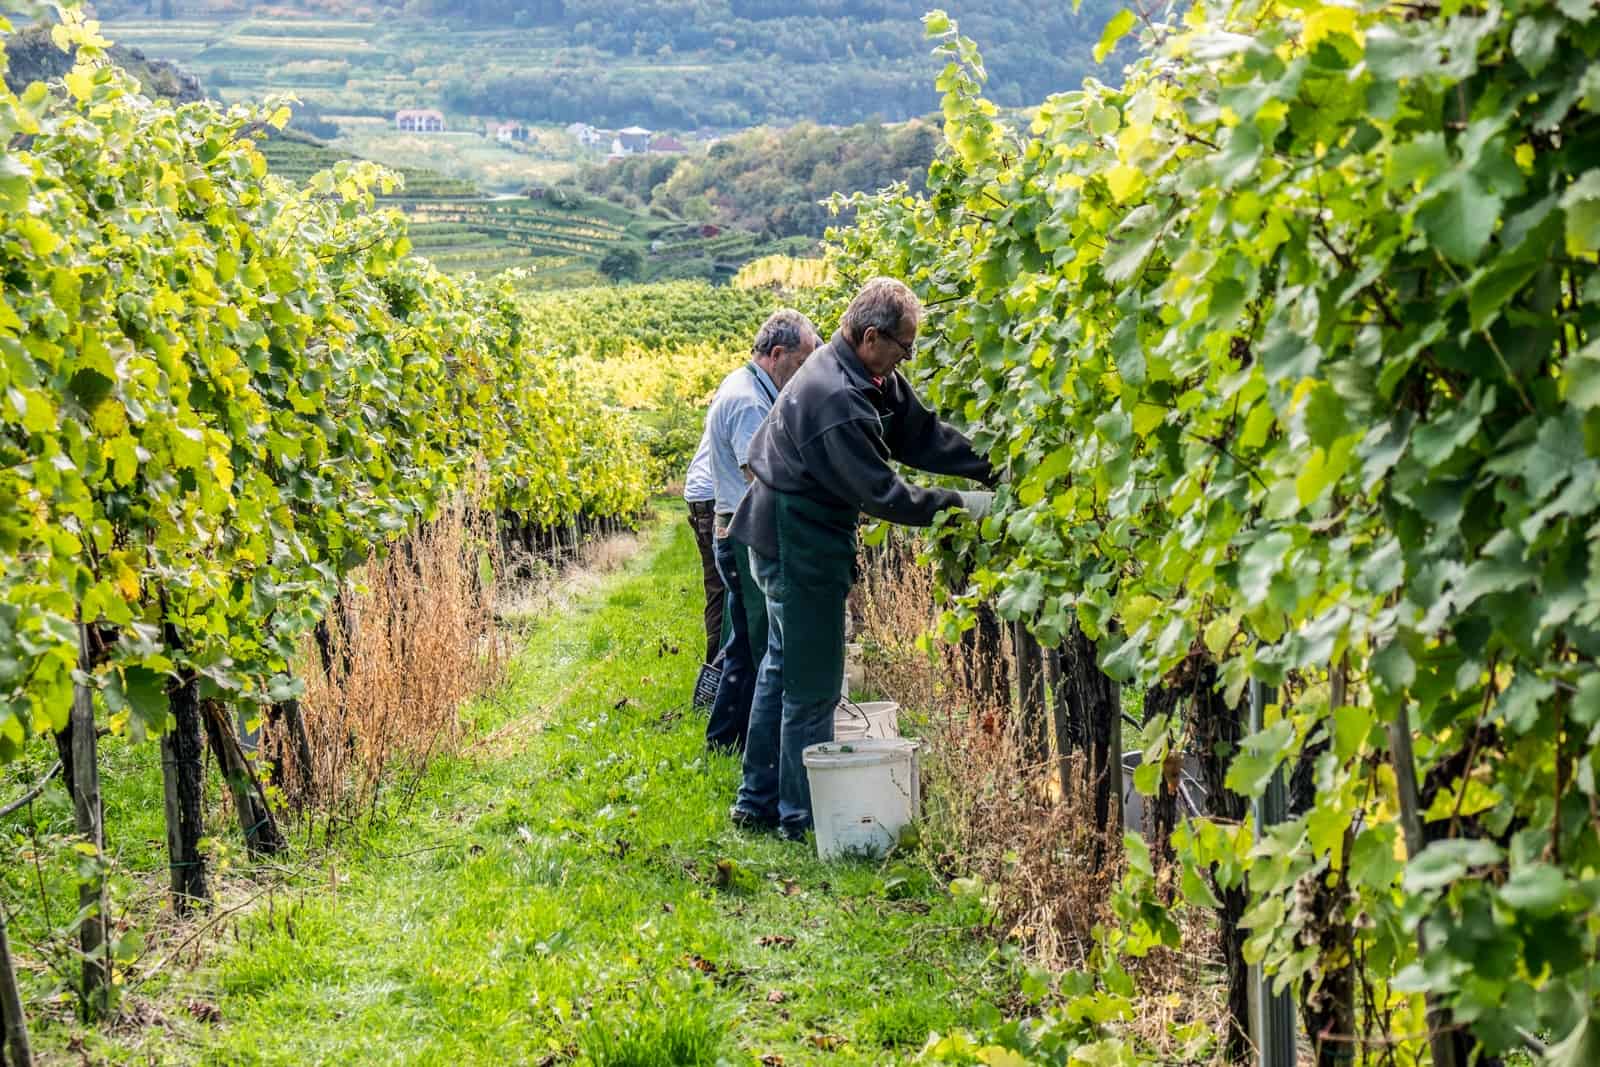 Two male grape pickers hard at work during a wine harvest season in Spitz, Austria. The vines are fully blossomed in green leaves and behind the men are the hilled terraces of vineyards that define this region.